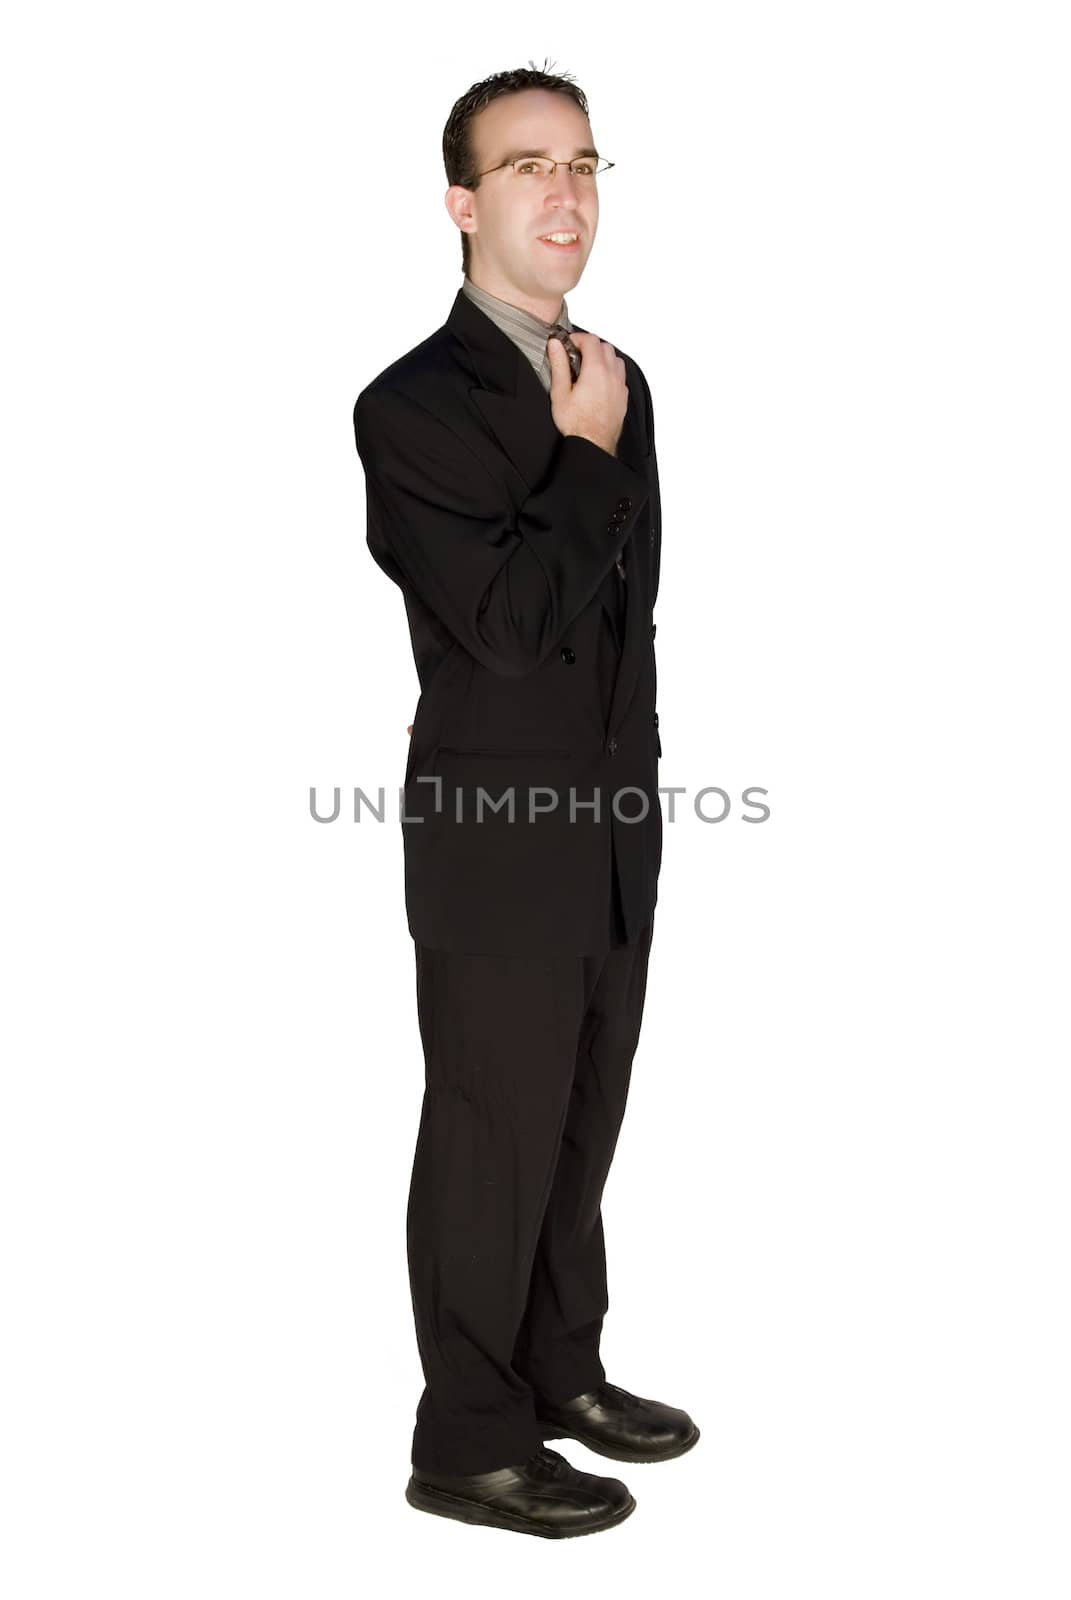 Young business man fixing his tie, isolated against a white background